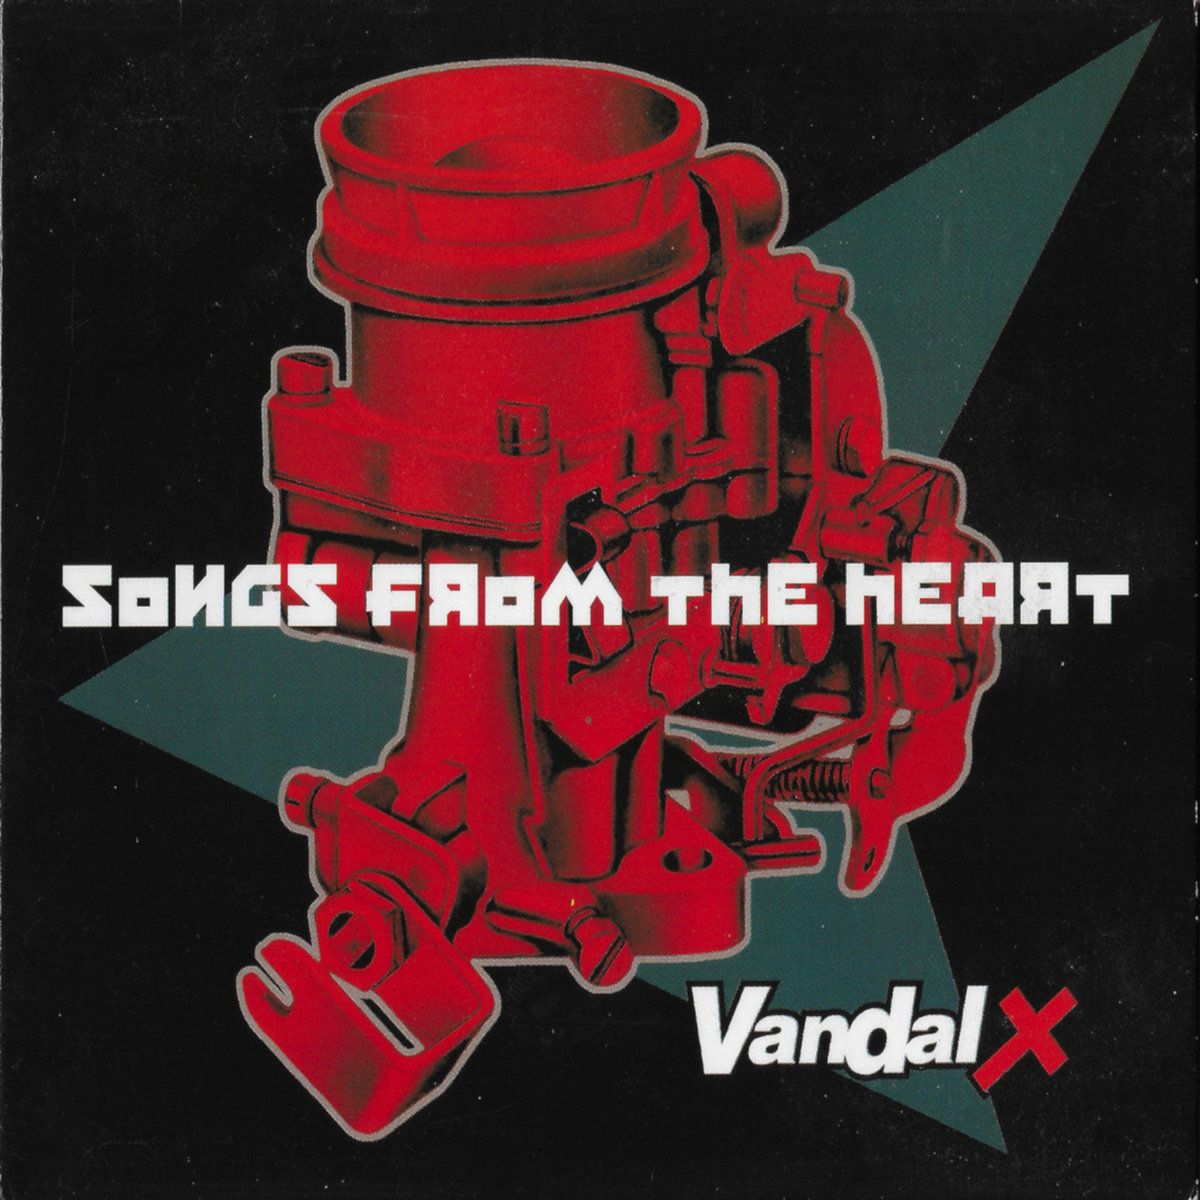 Vandal X - Songs From The Heart front cover